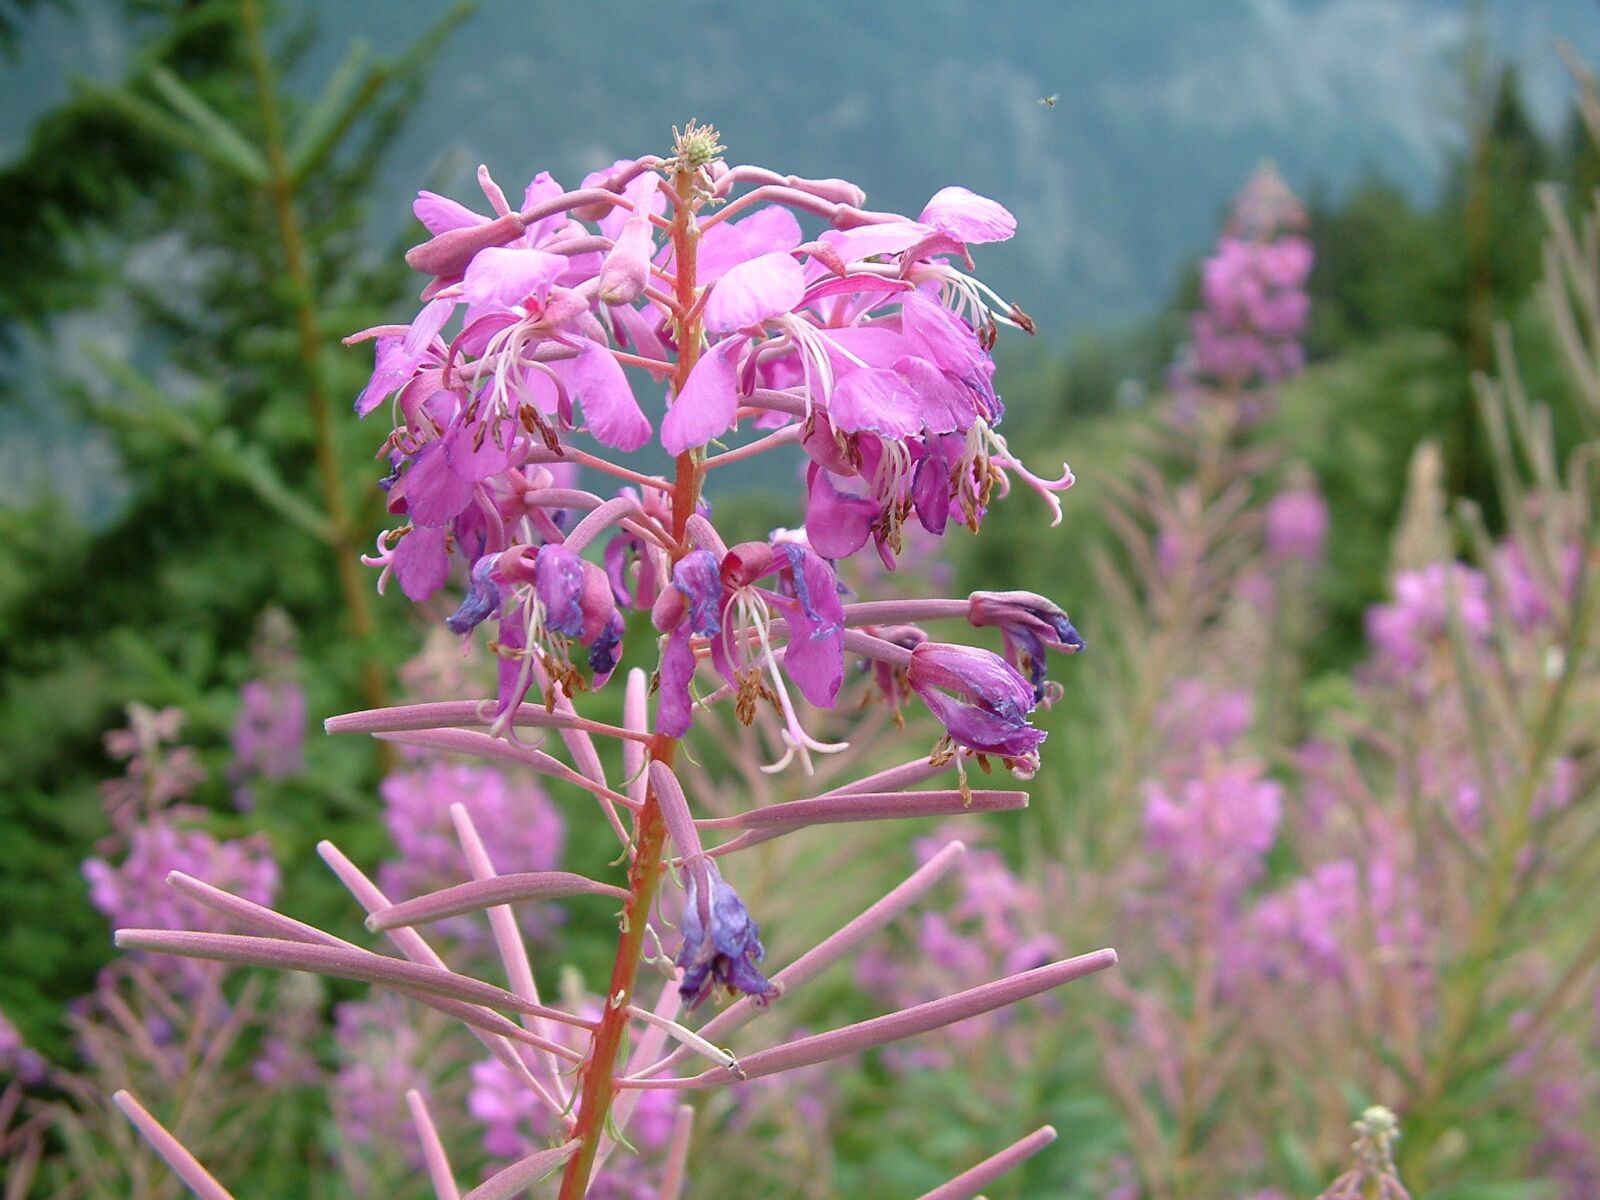 Fujifilm FinePix S602 ZOOM sample photo. Fireweed, plant, outdoors photography